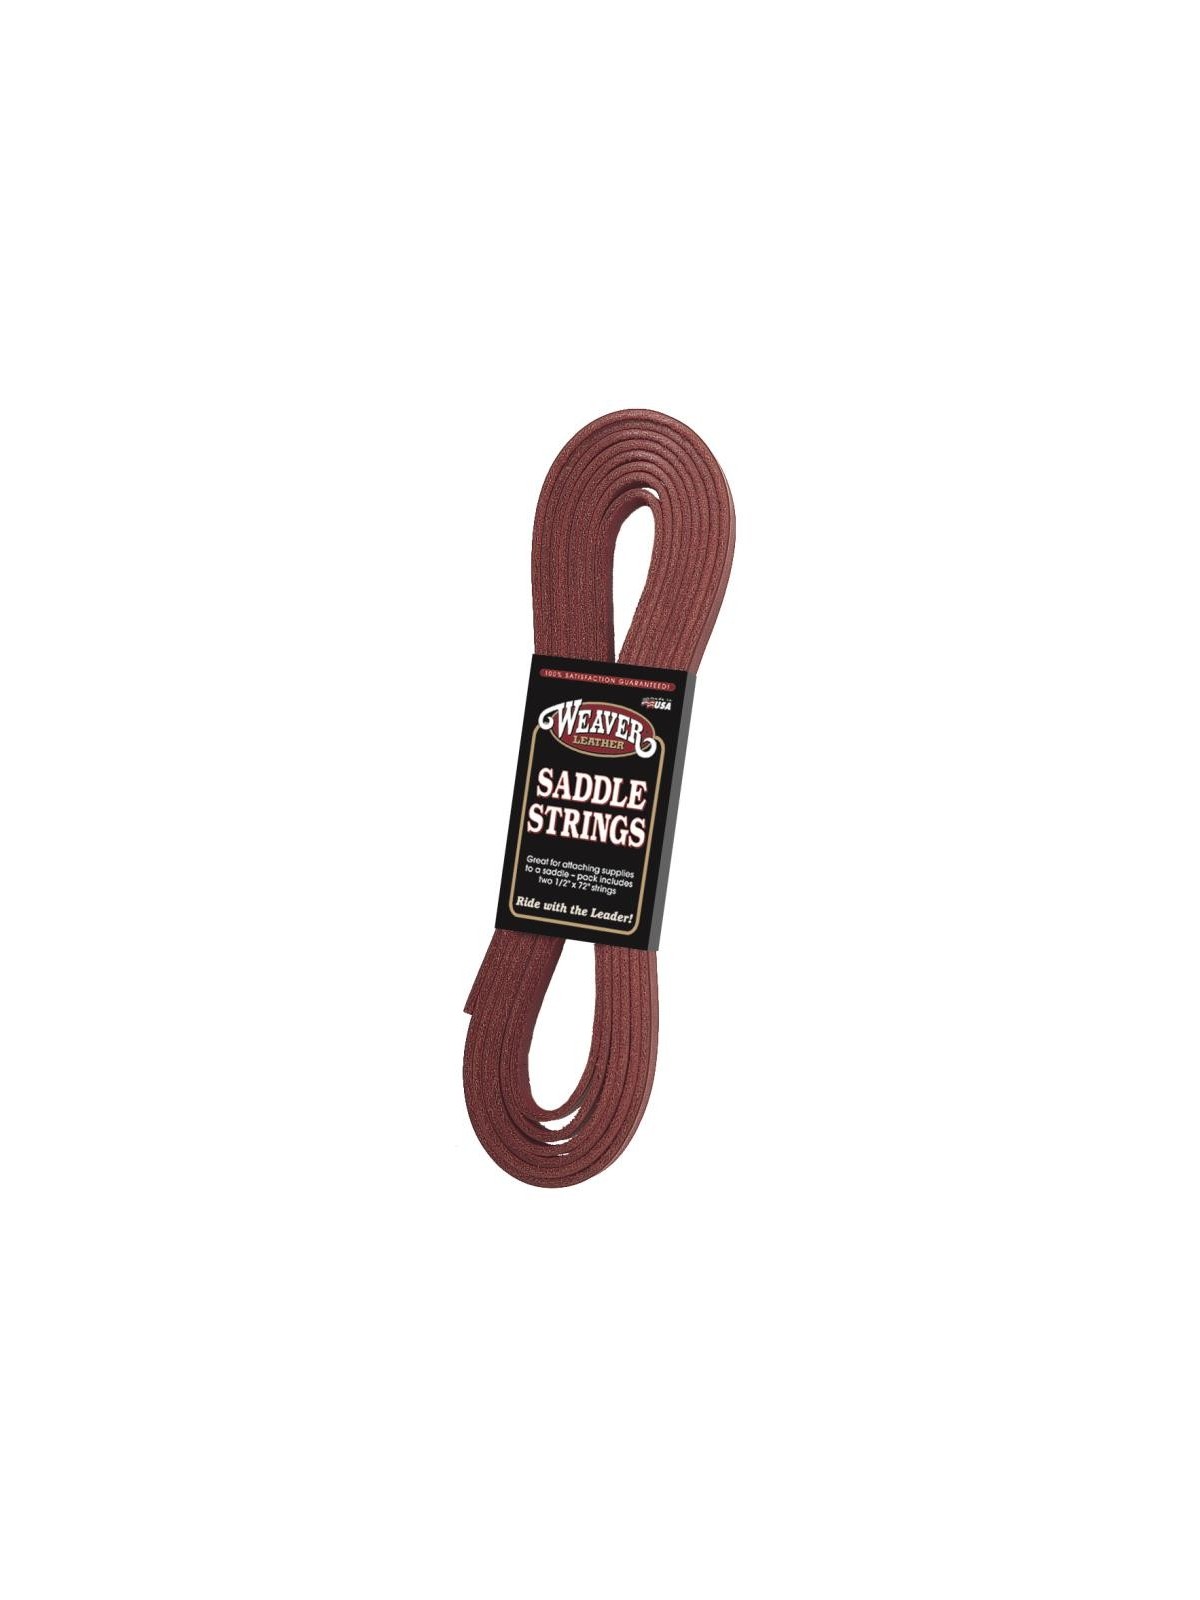 Weaver Leather Saddle Strings 2x Pack, 1/2" x 72"